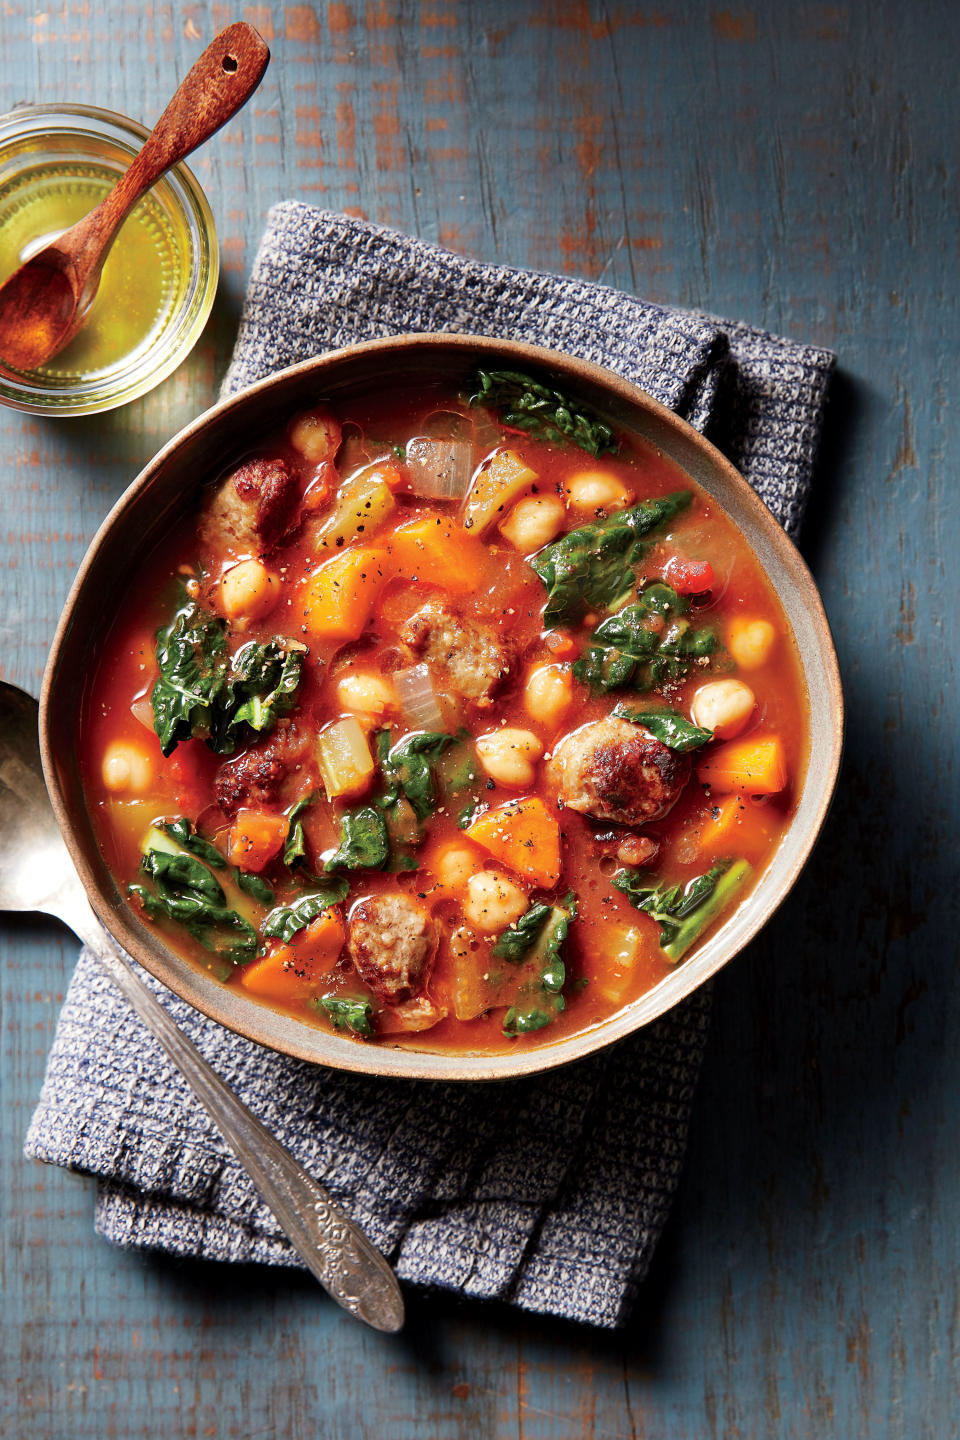 Spicy Sausage-and-Chickpea Soup with Garlic Oil